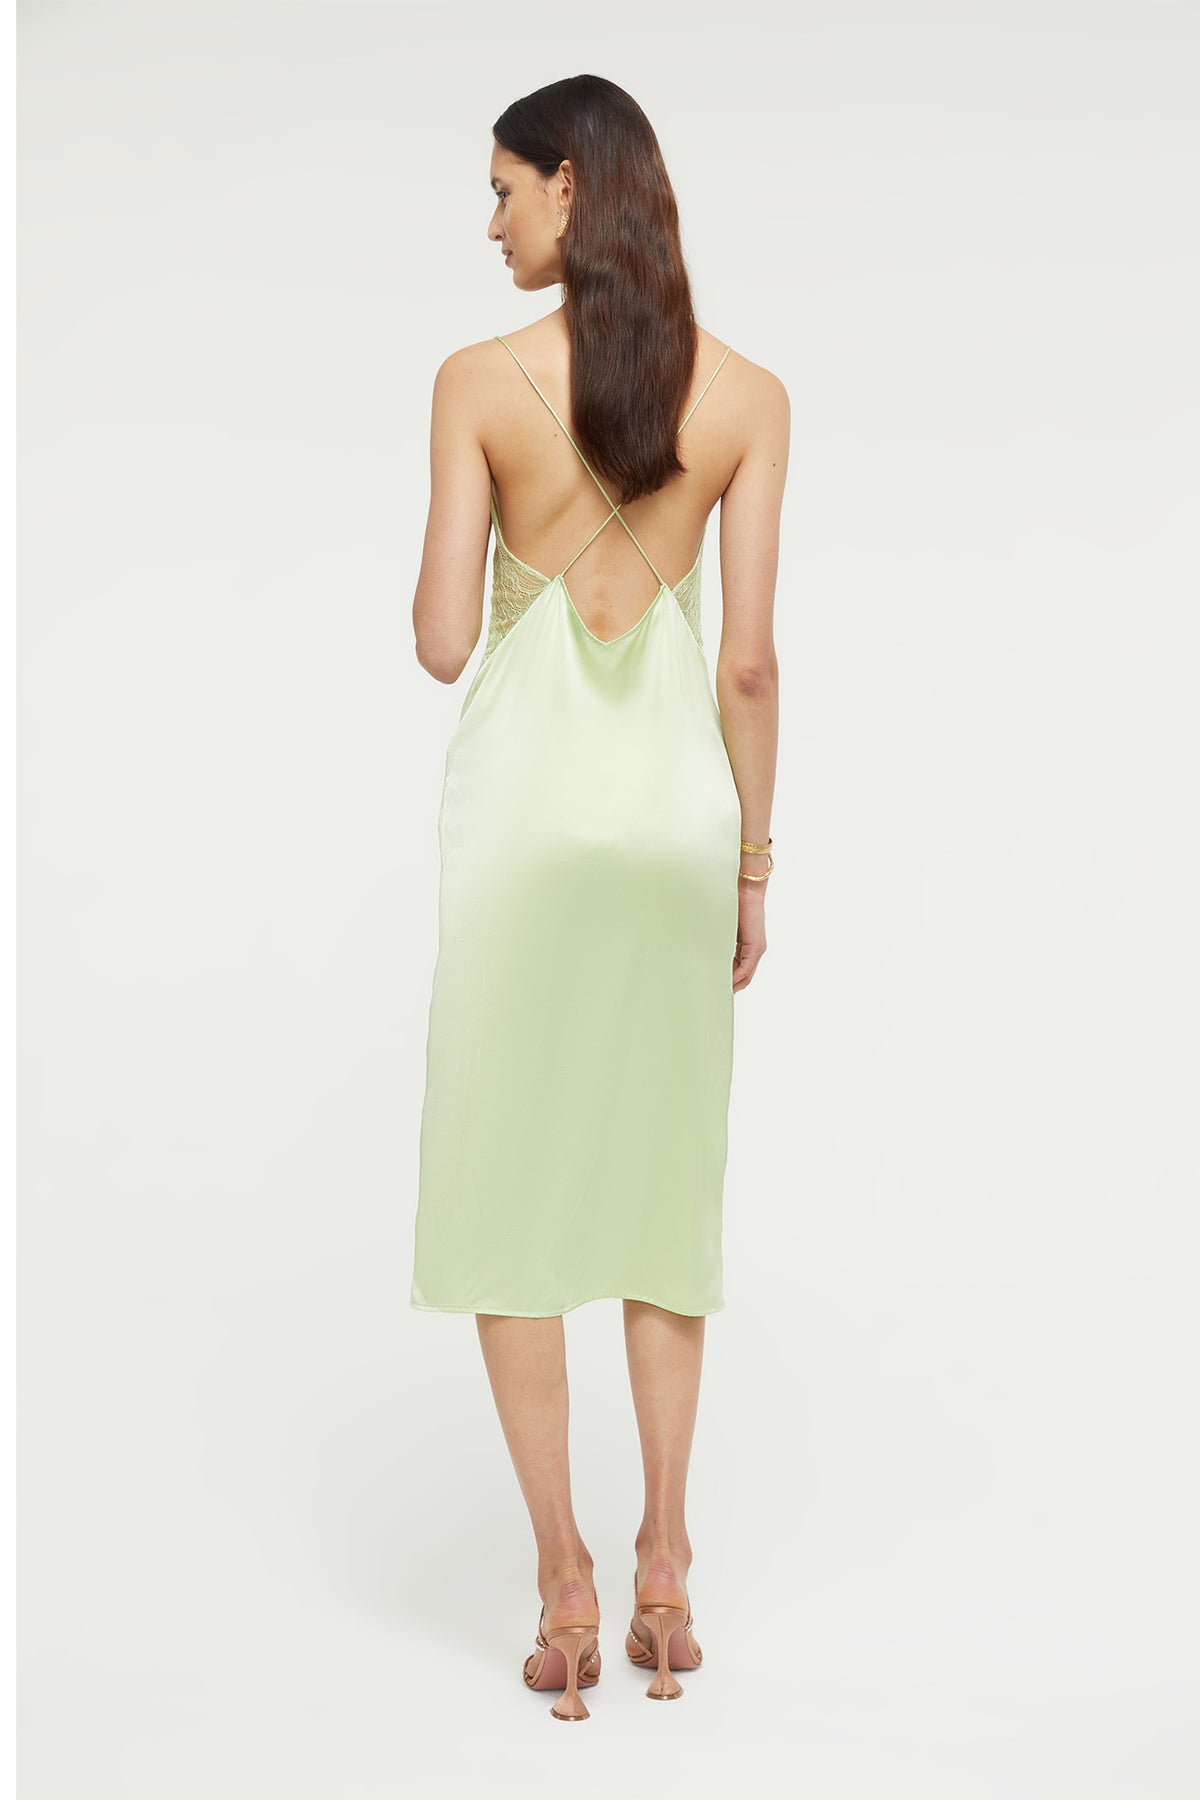 GINIA Desire Dress in Pure Lime 19 Momme Silk